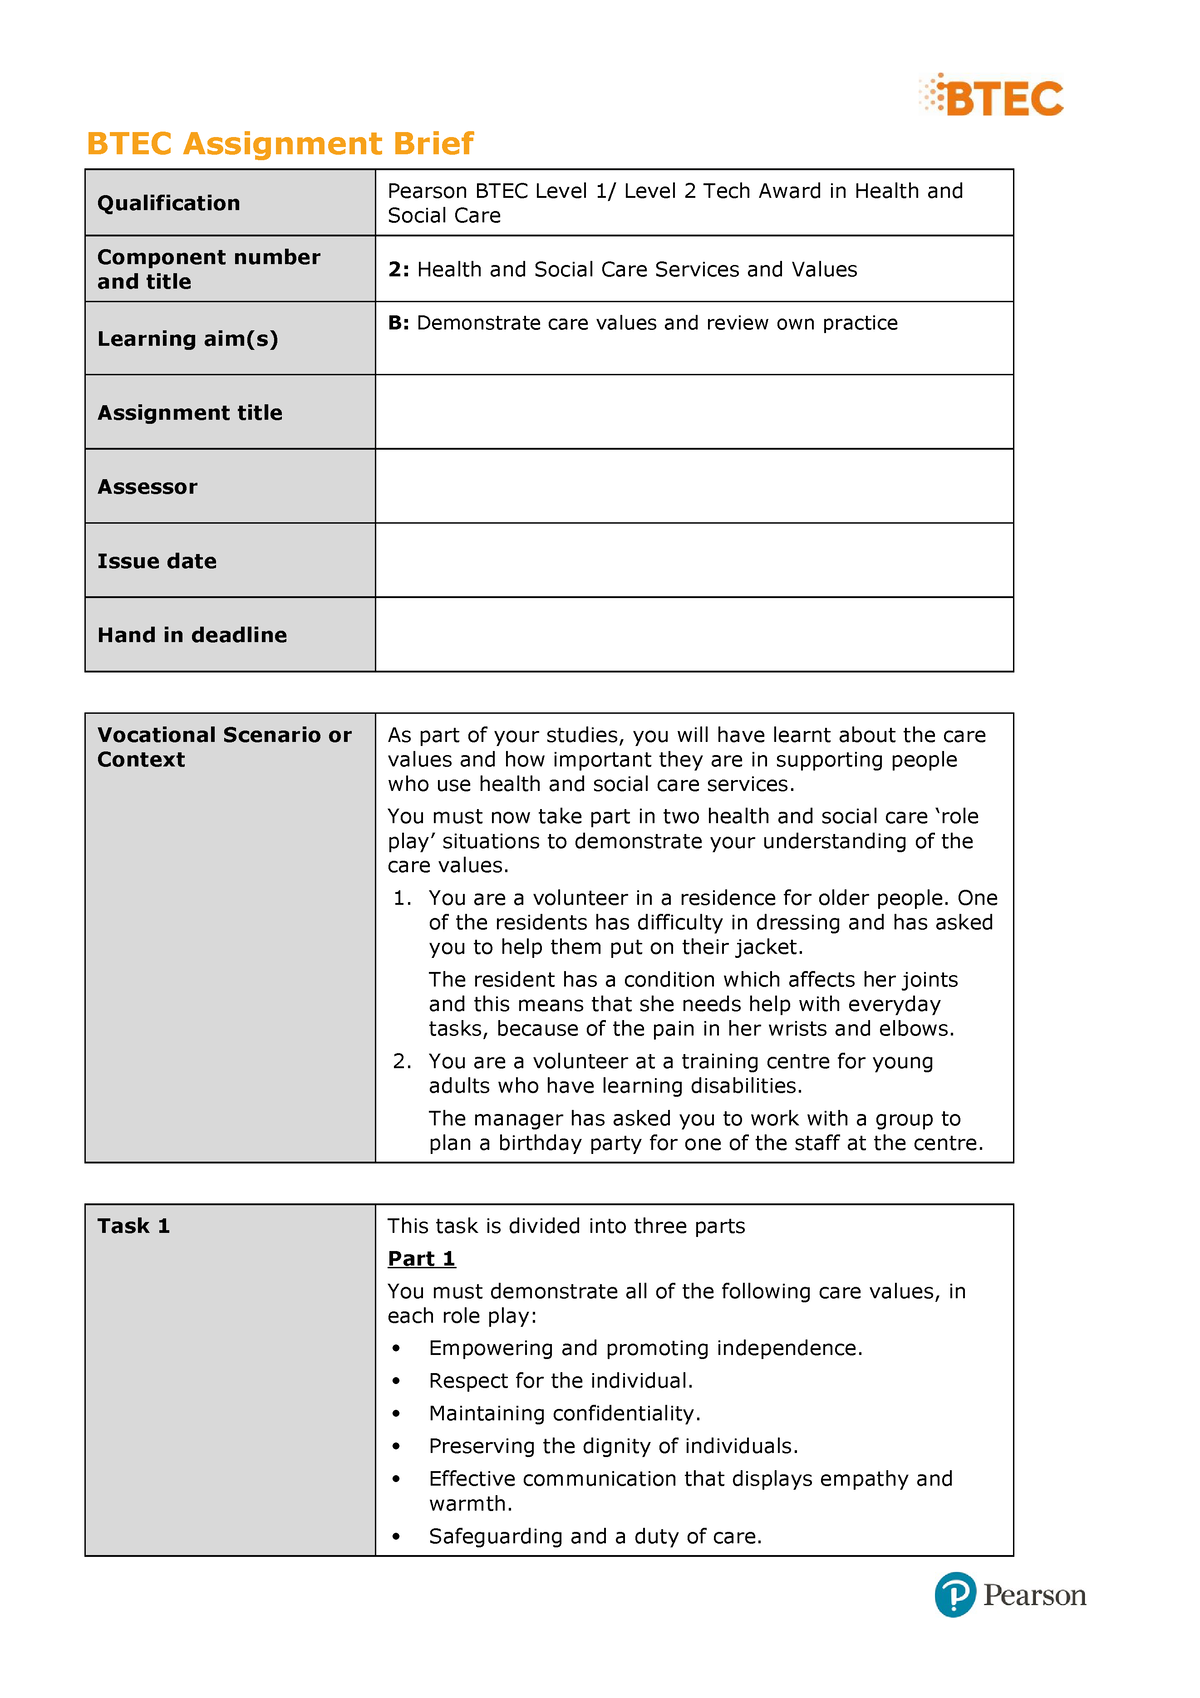 btec guide to writing assignment briefs